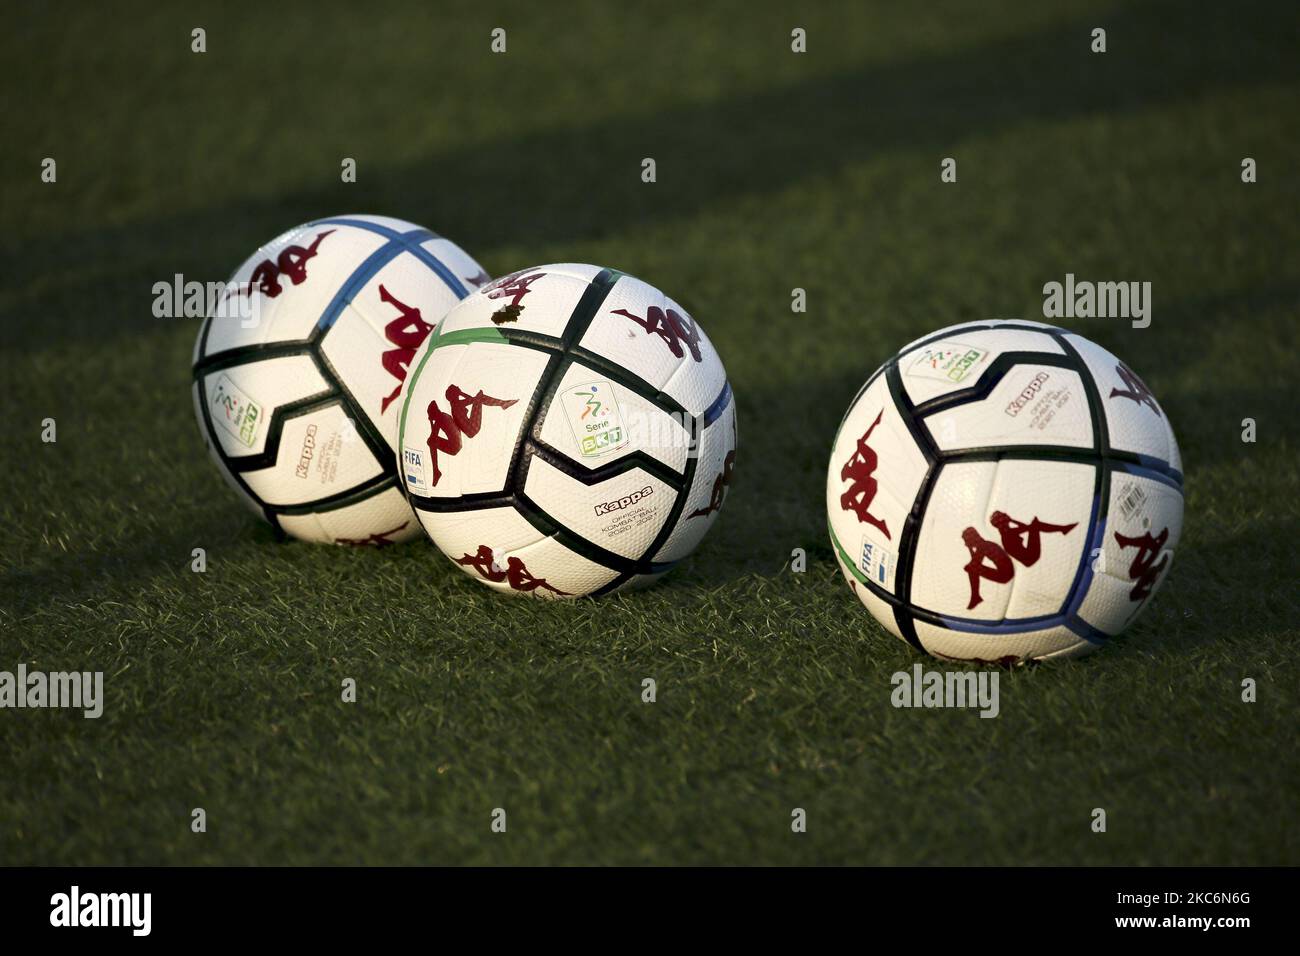 Serie b italian league hi-res stock photography and images - Alamy